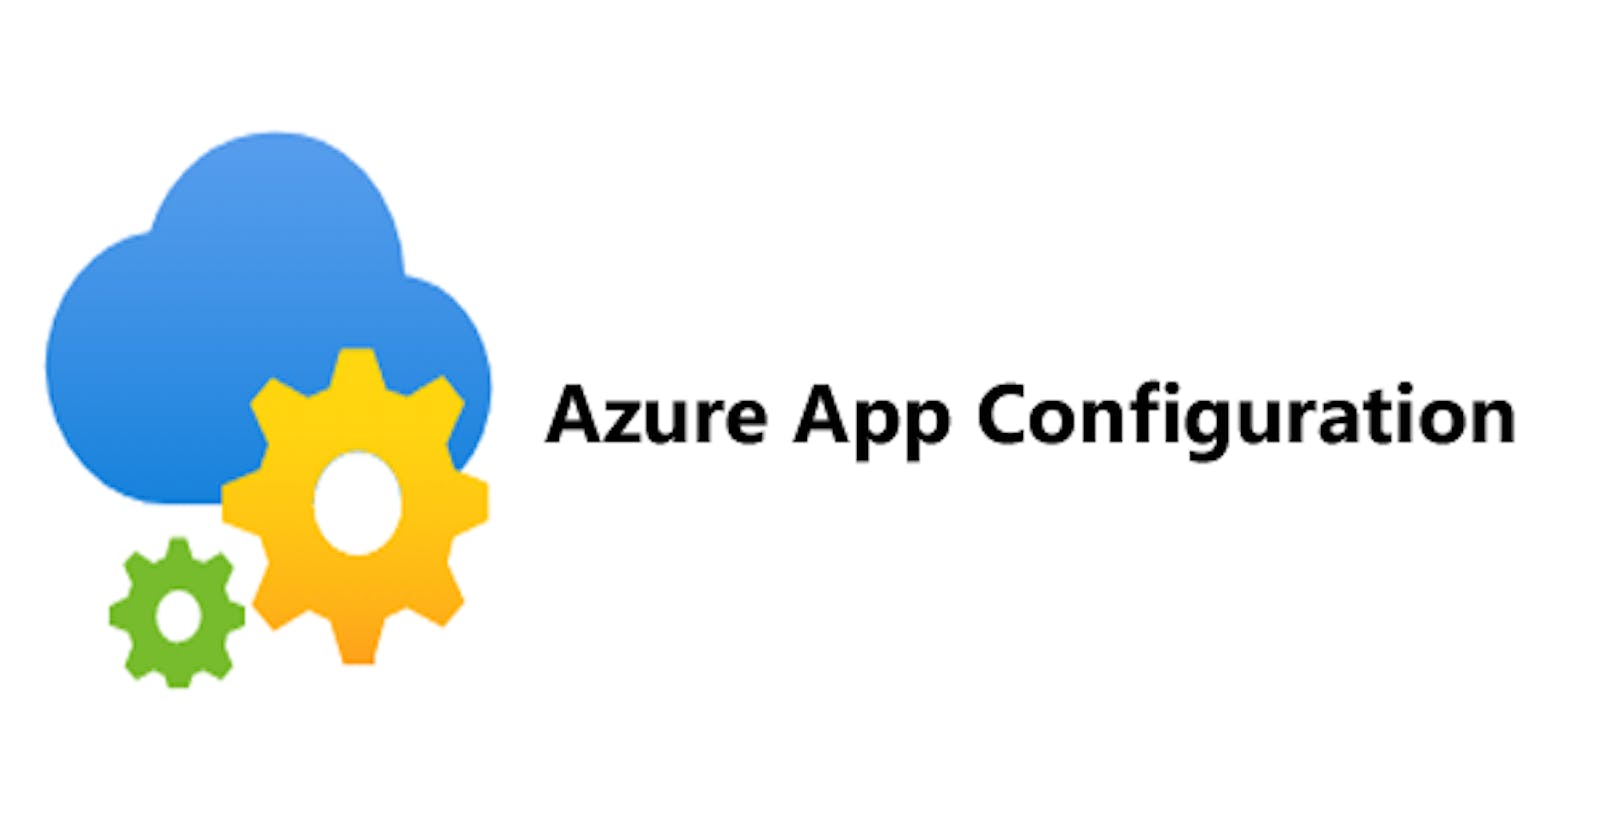 The Ultimate Guide to Mastering Azure App Configuration